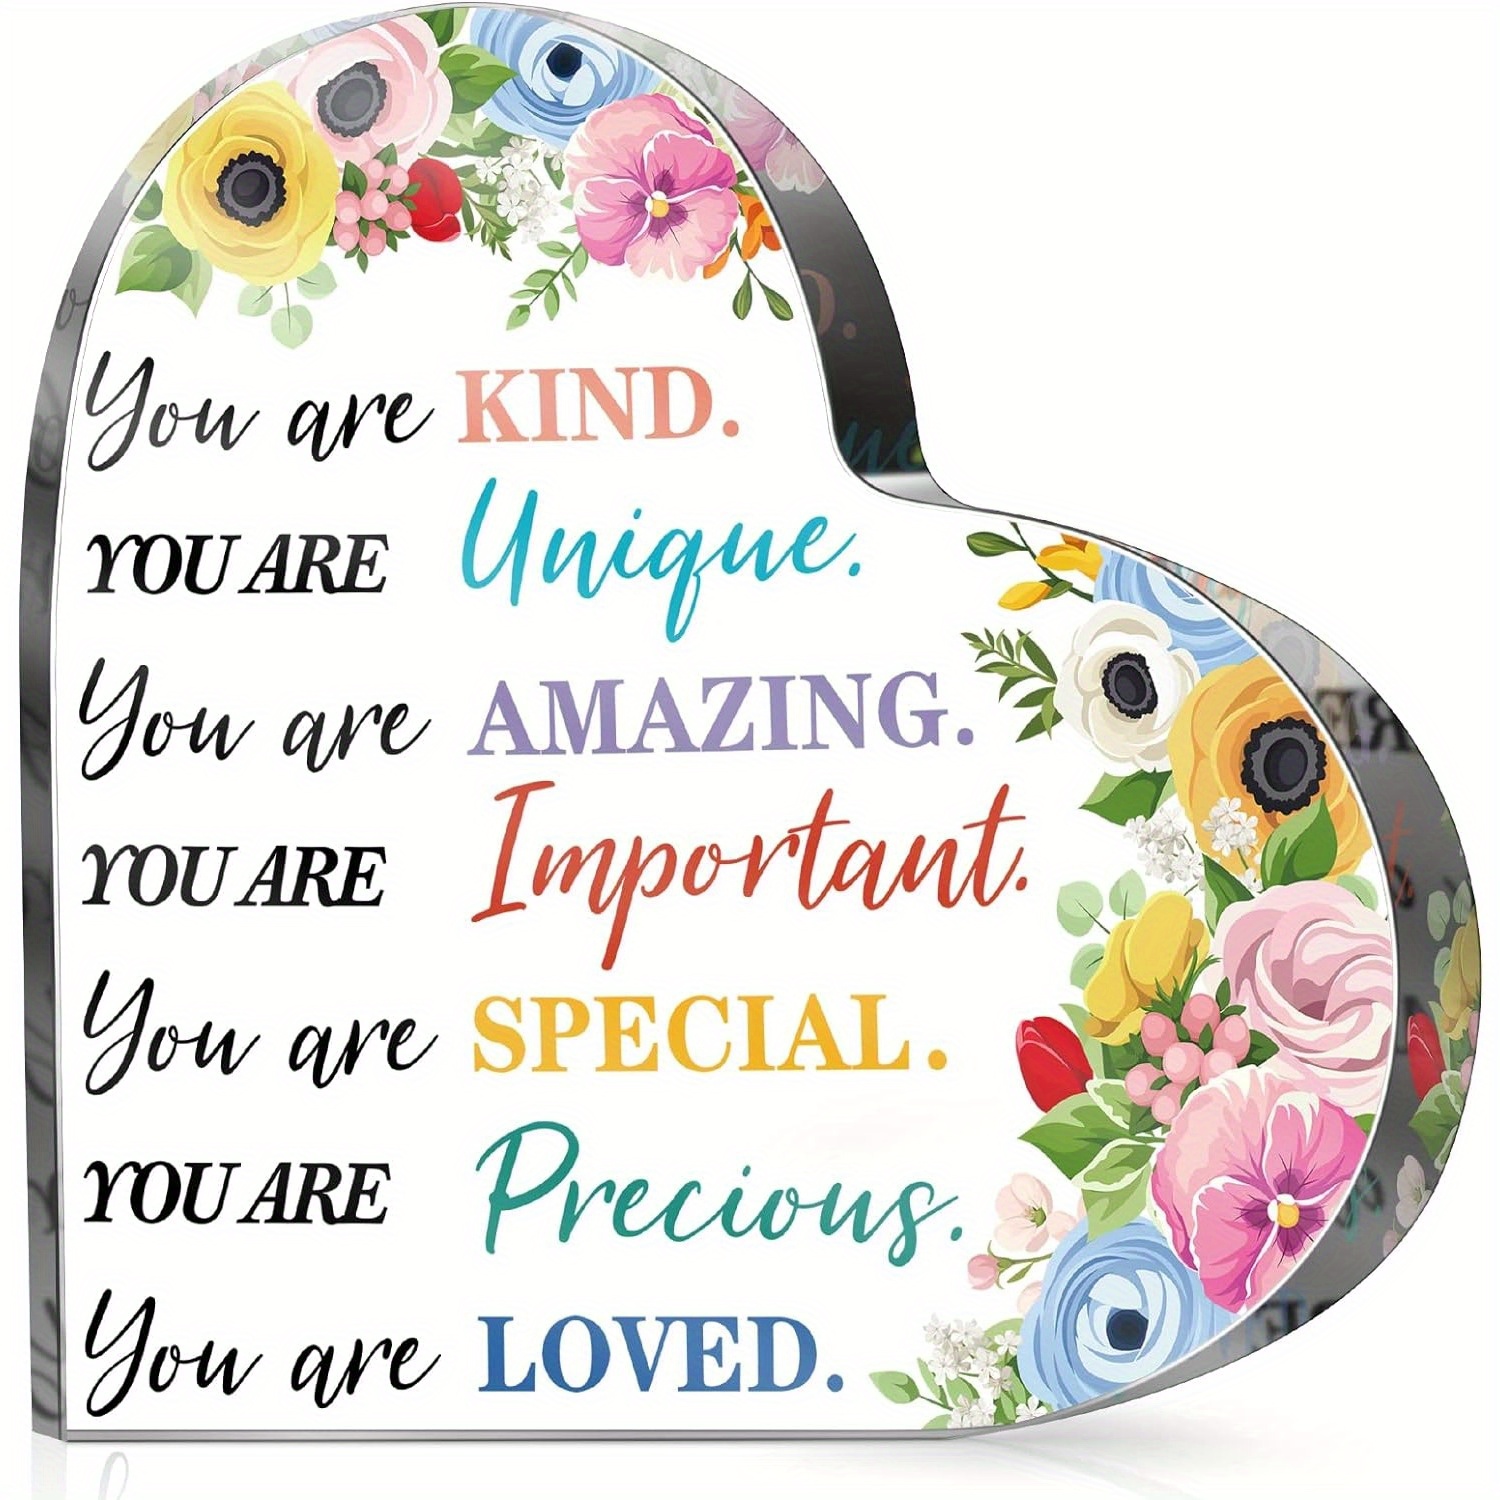 You are Amazing Encouragement Gifts Inspirational Quotes Gifts for